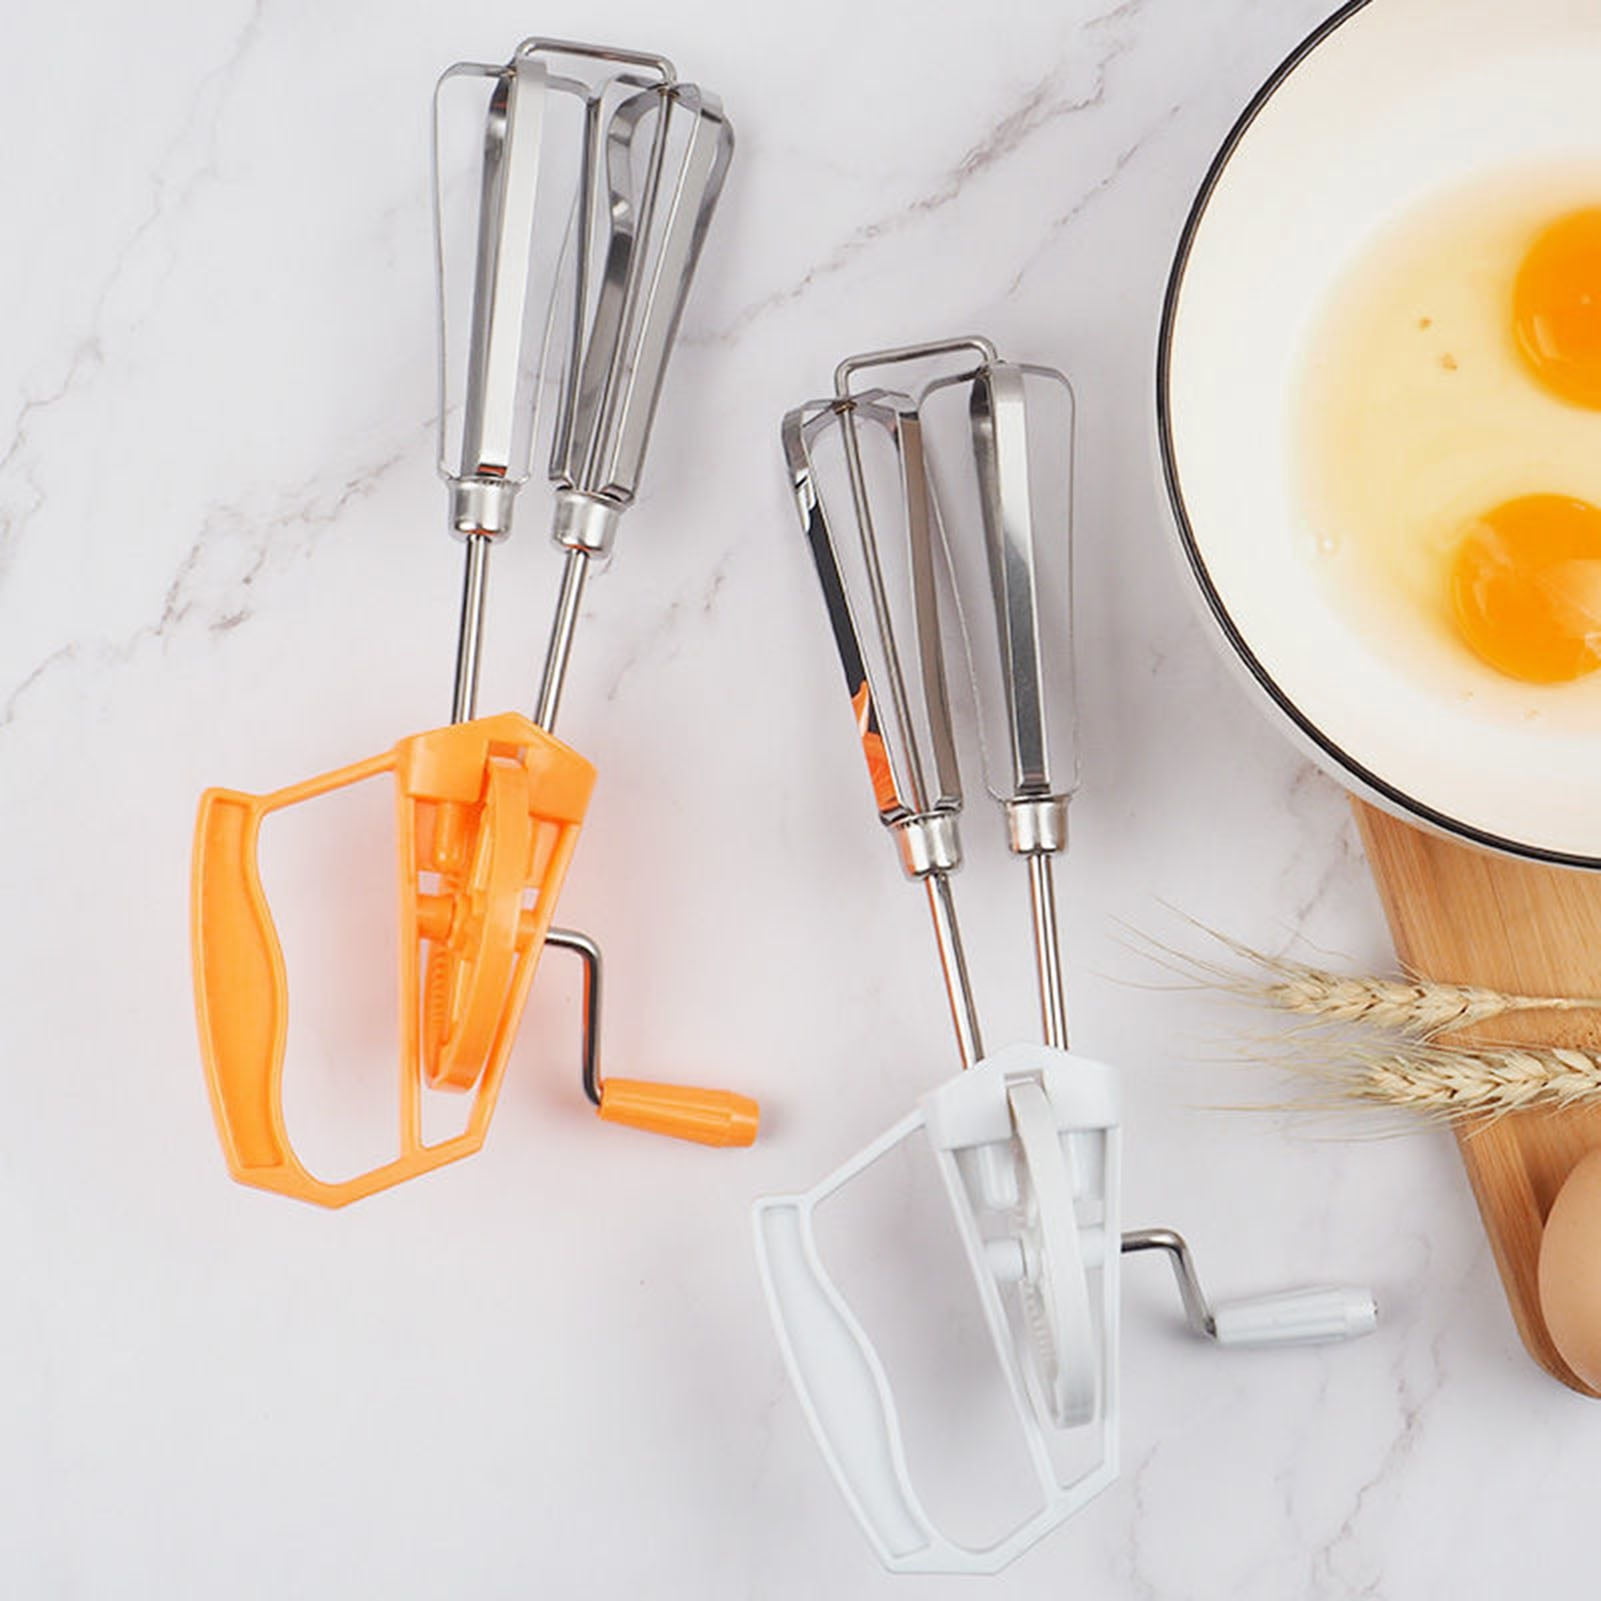 Worallymy Hand Crank Egg Beater Stainless Steel Rotary Hand Whisk Manual Egg Mixer Kitchen Cooking Tool, Size: 25.5, White